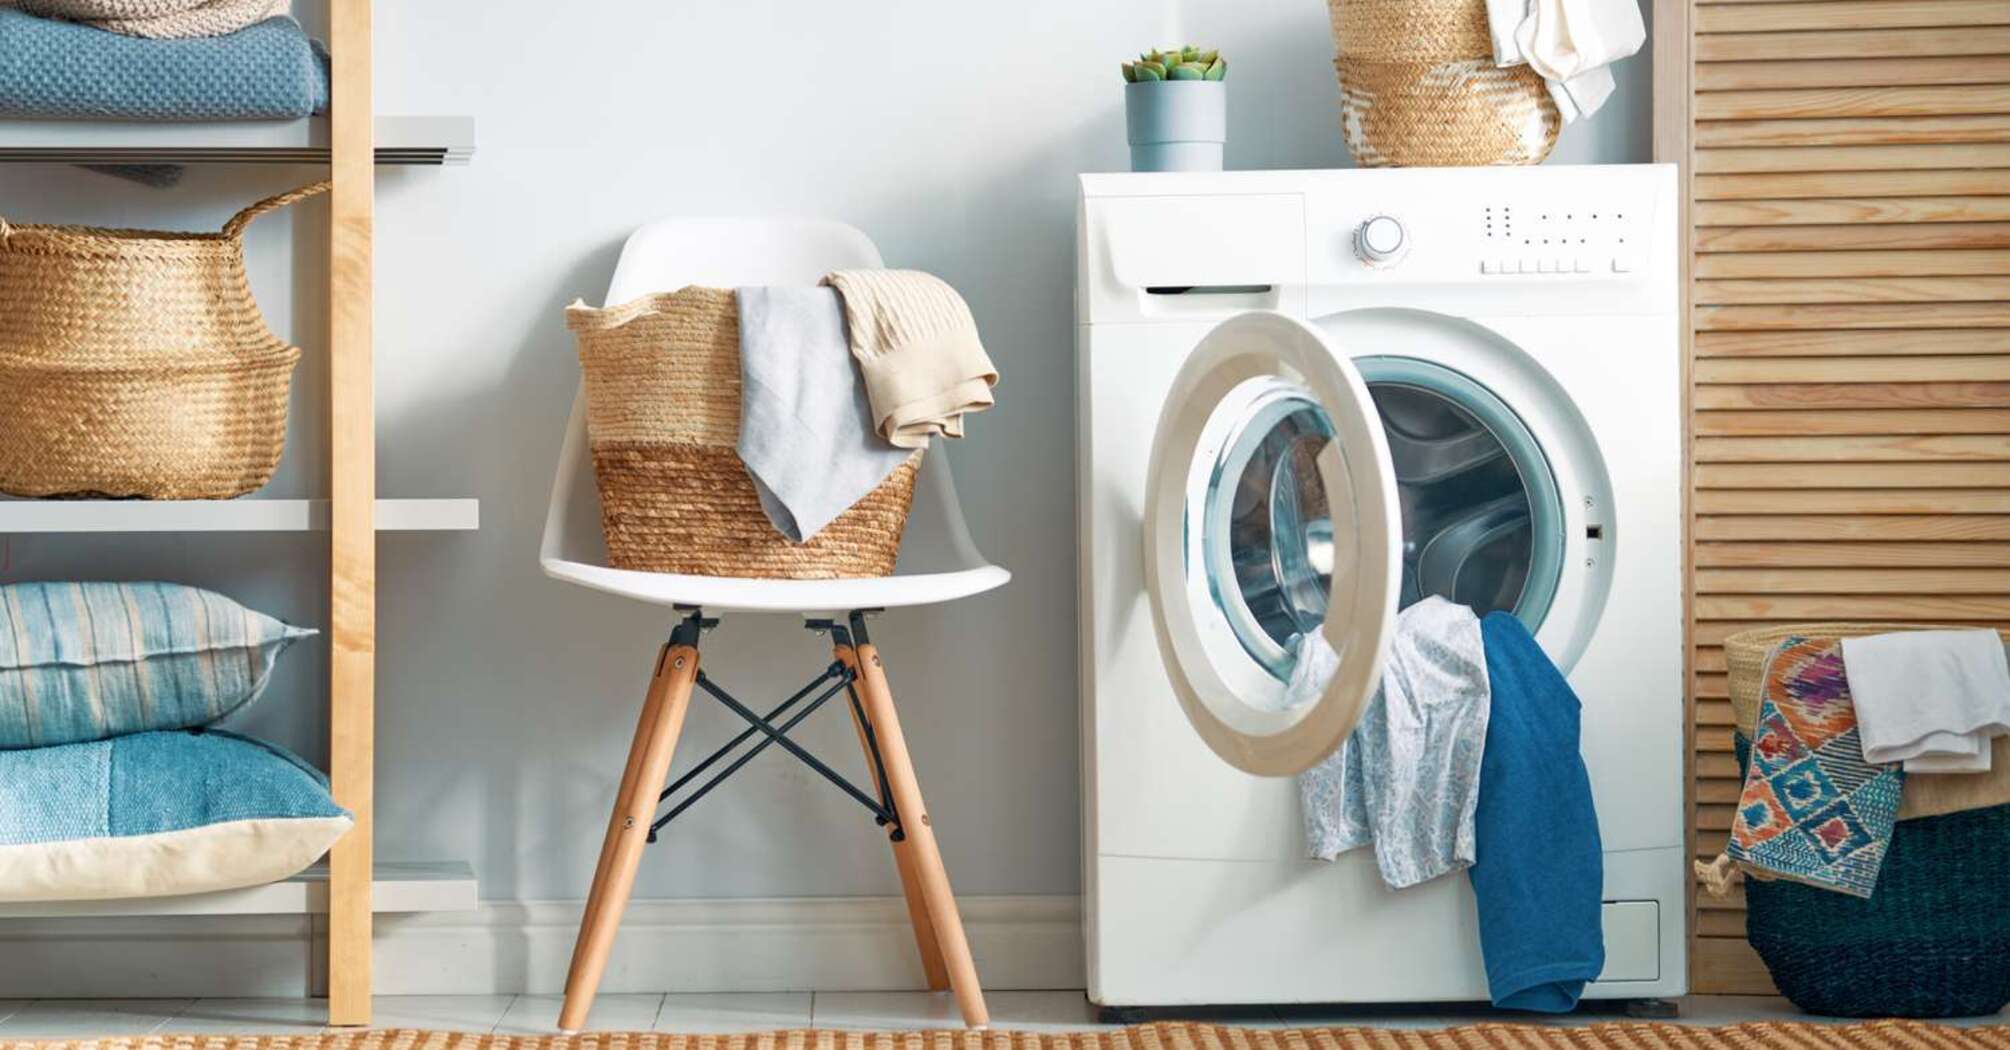 How to save money on drying laundry in winter